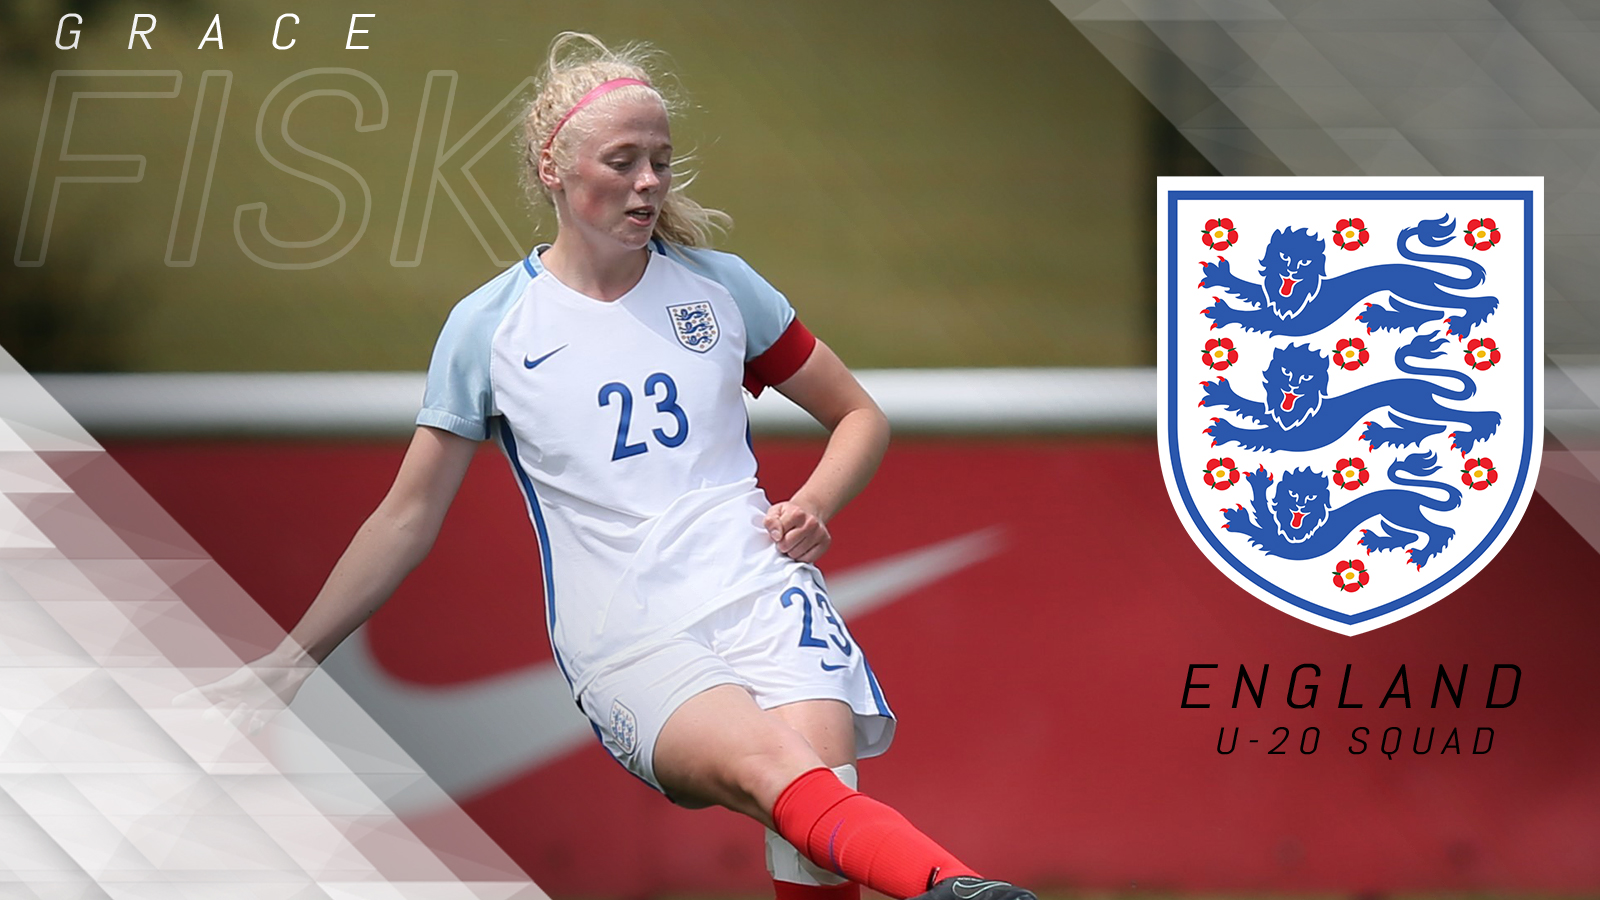 Fisk Officially Named to England U20 World Cup Team